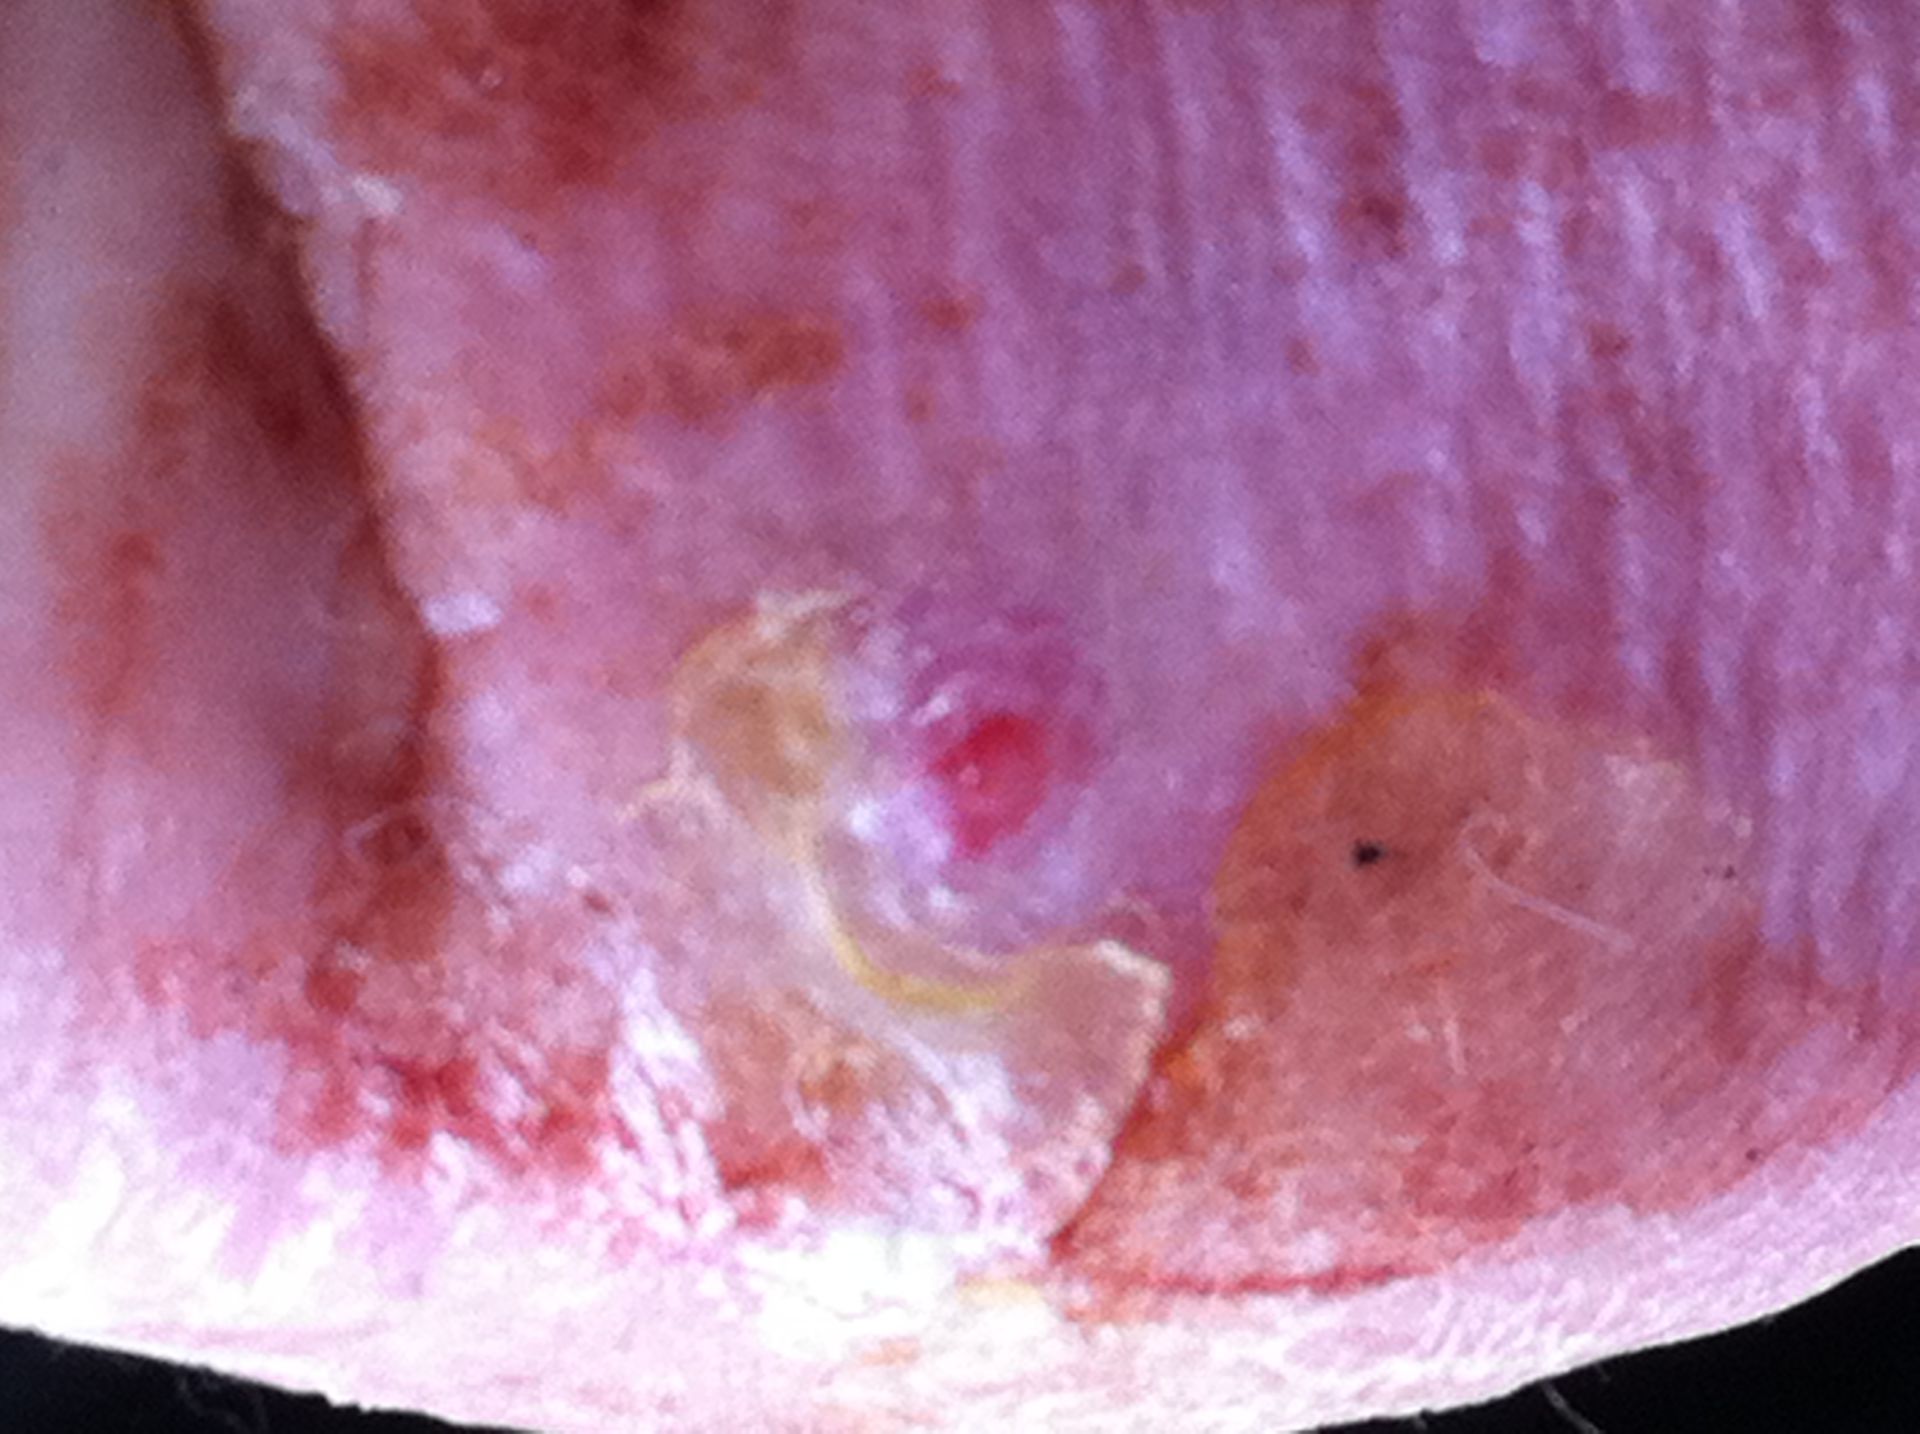 Dermatology, injury wound on the foot